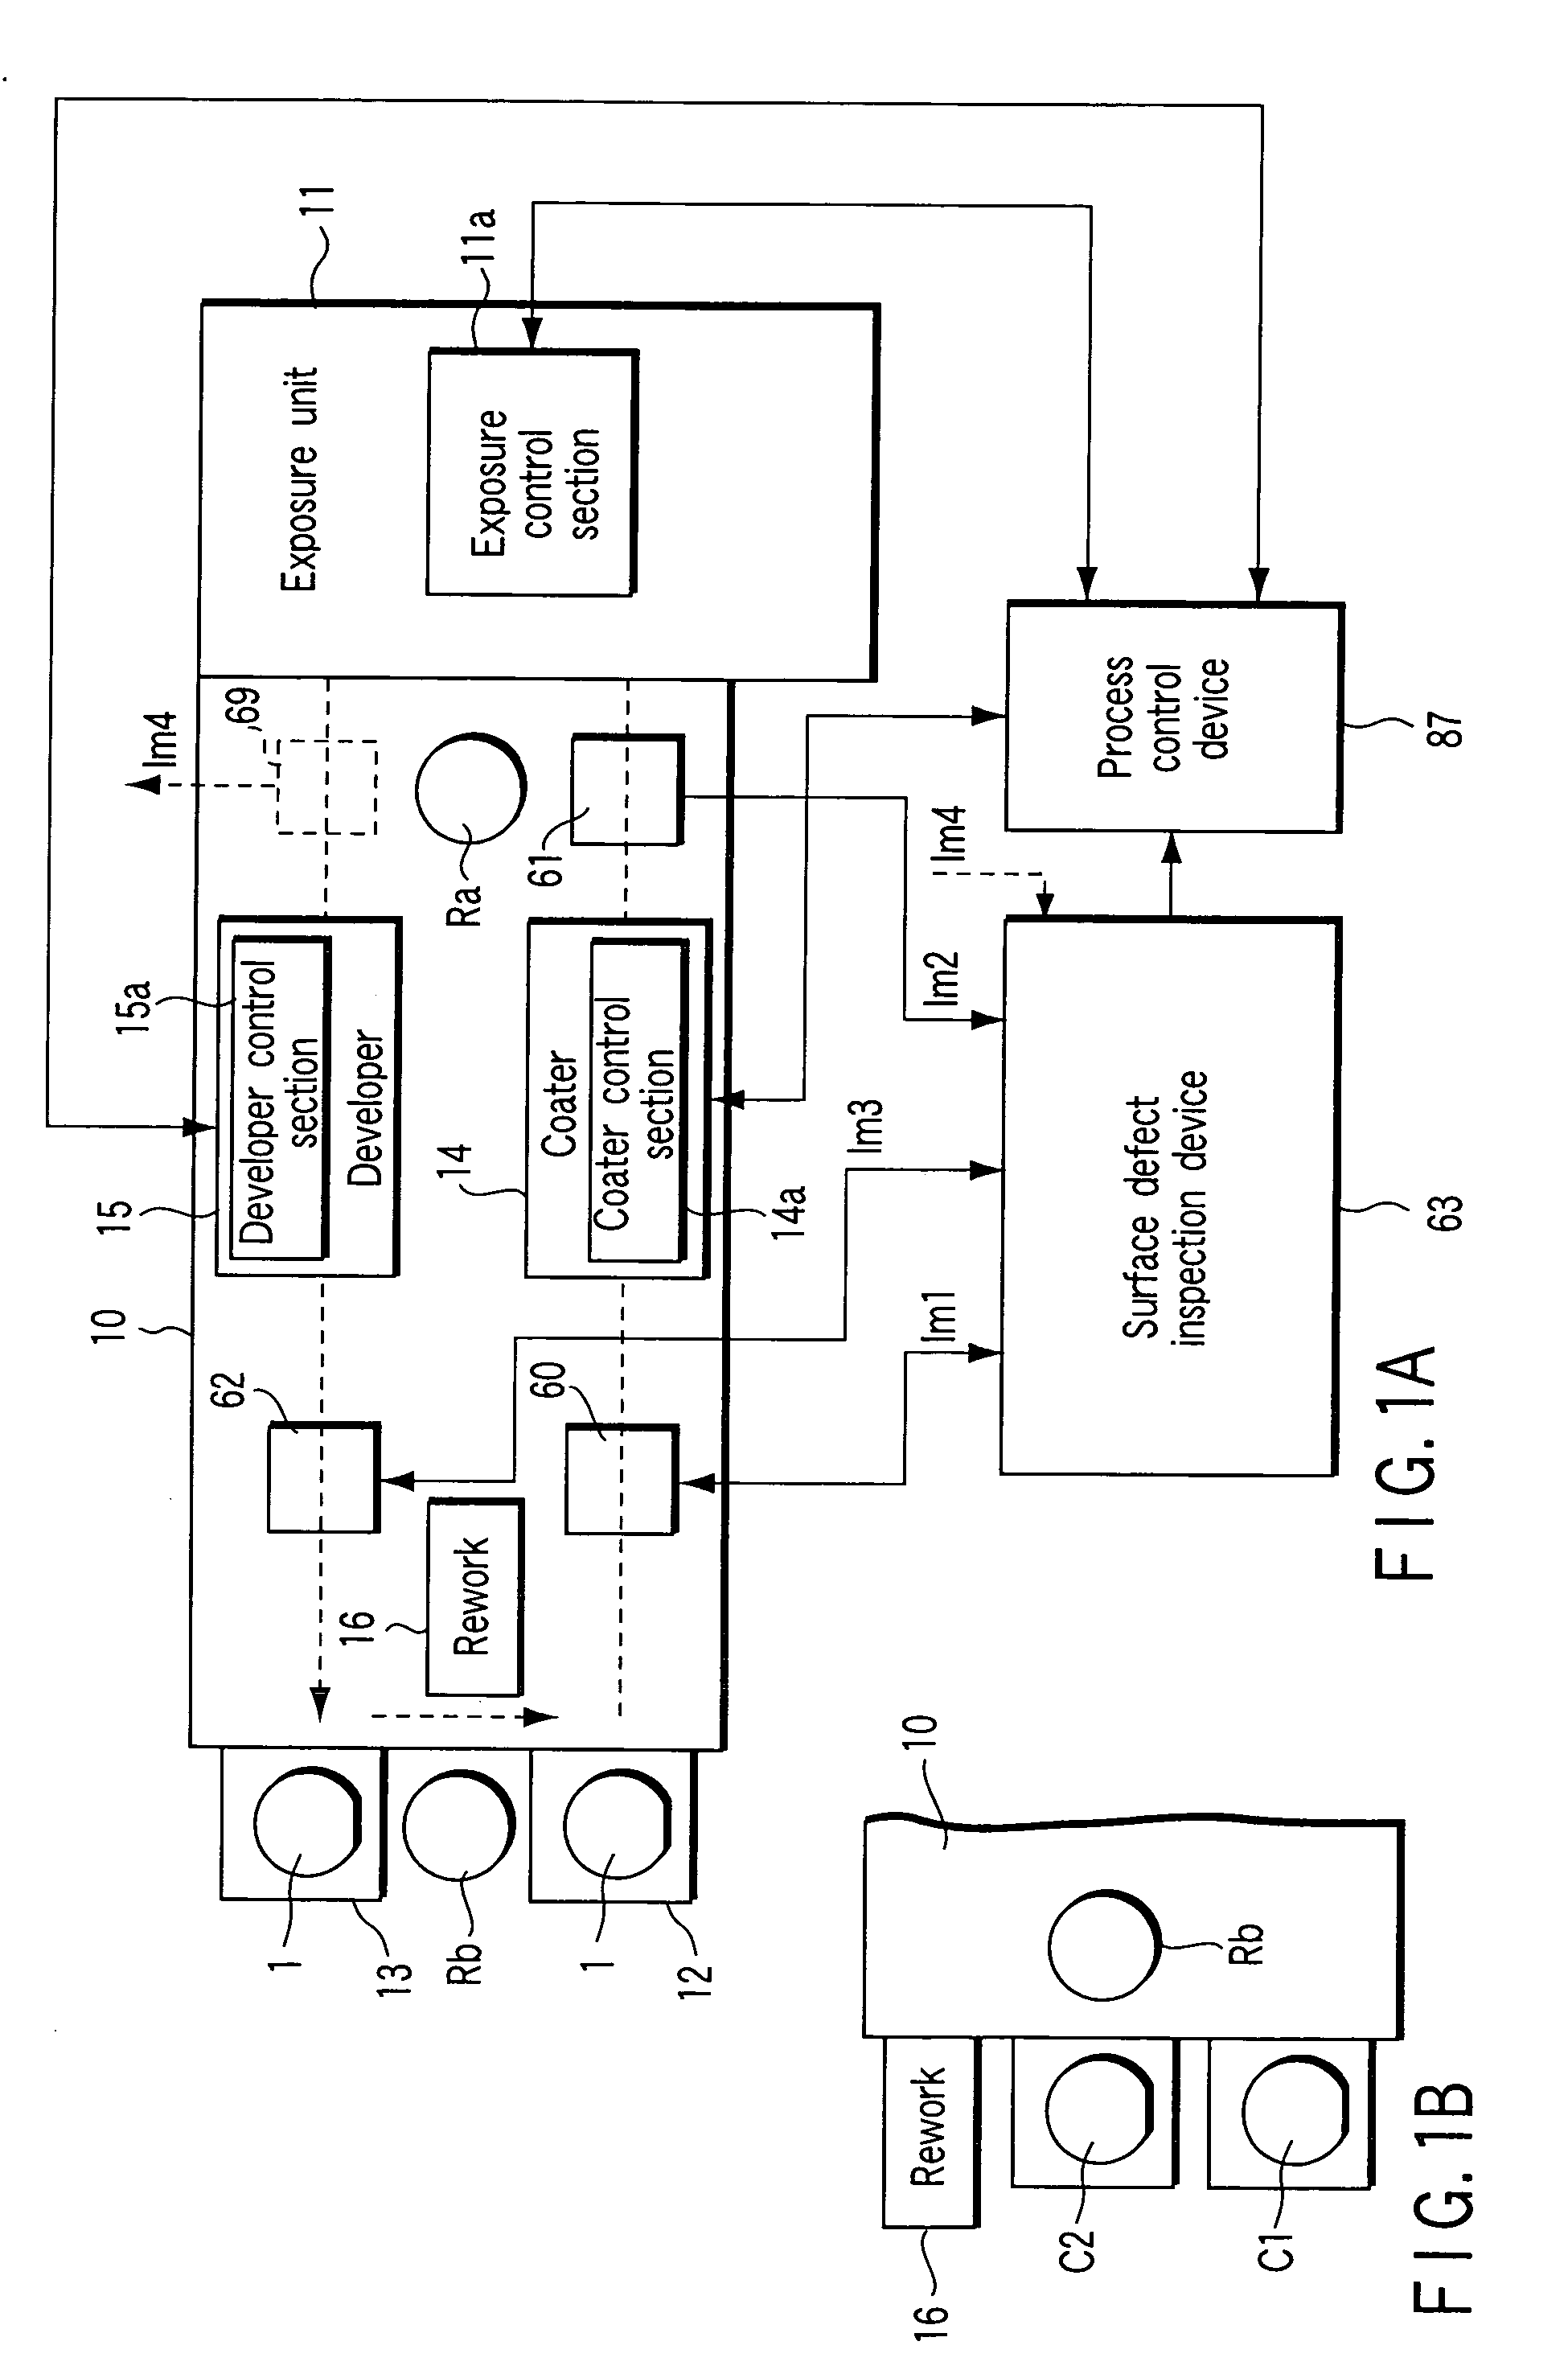 Method and apparatus for manufacturing semiconductor